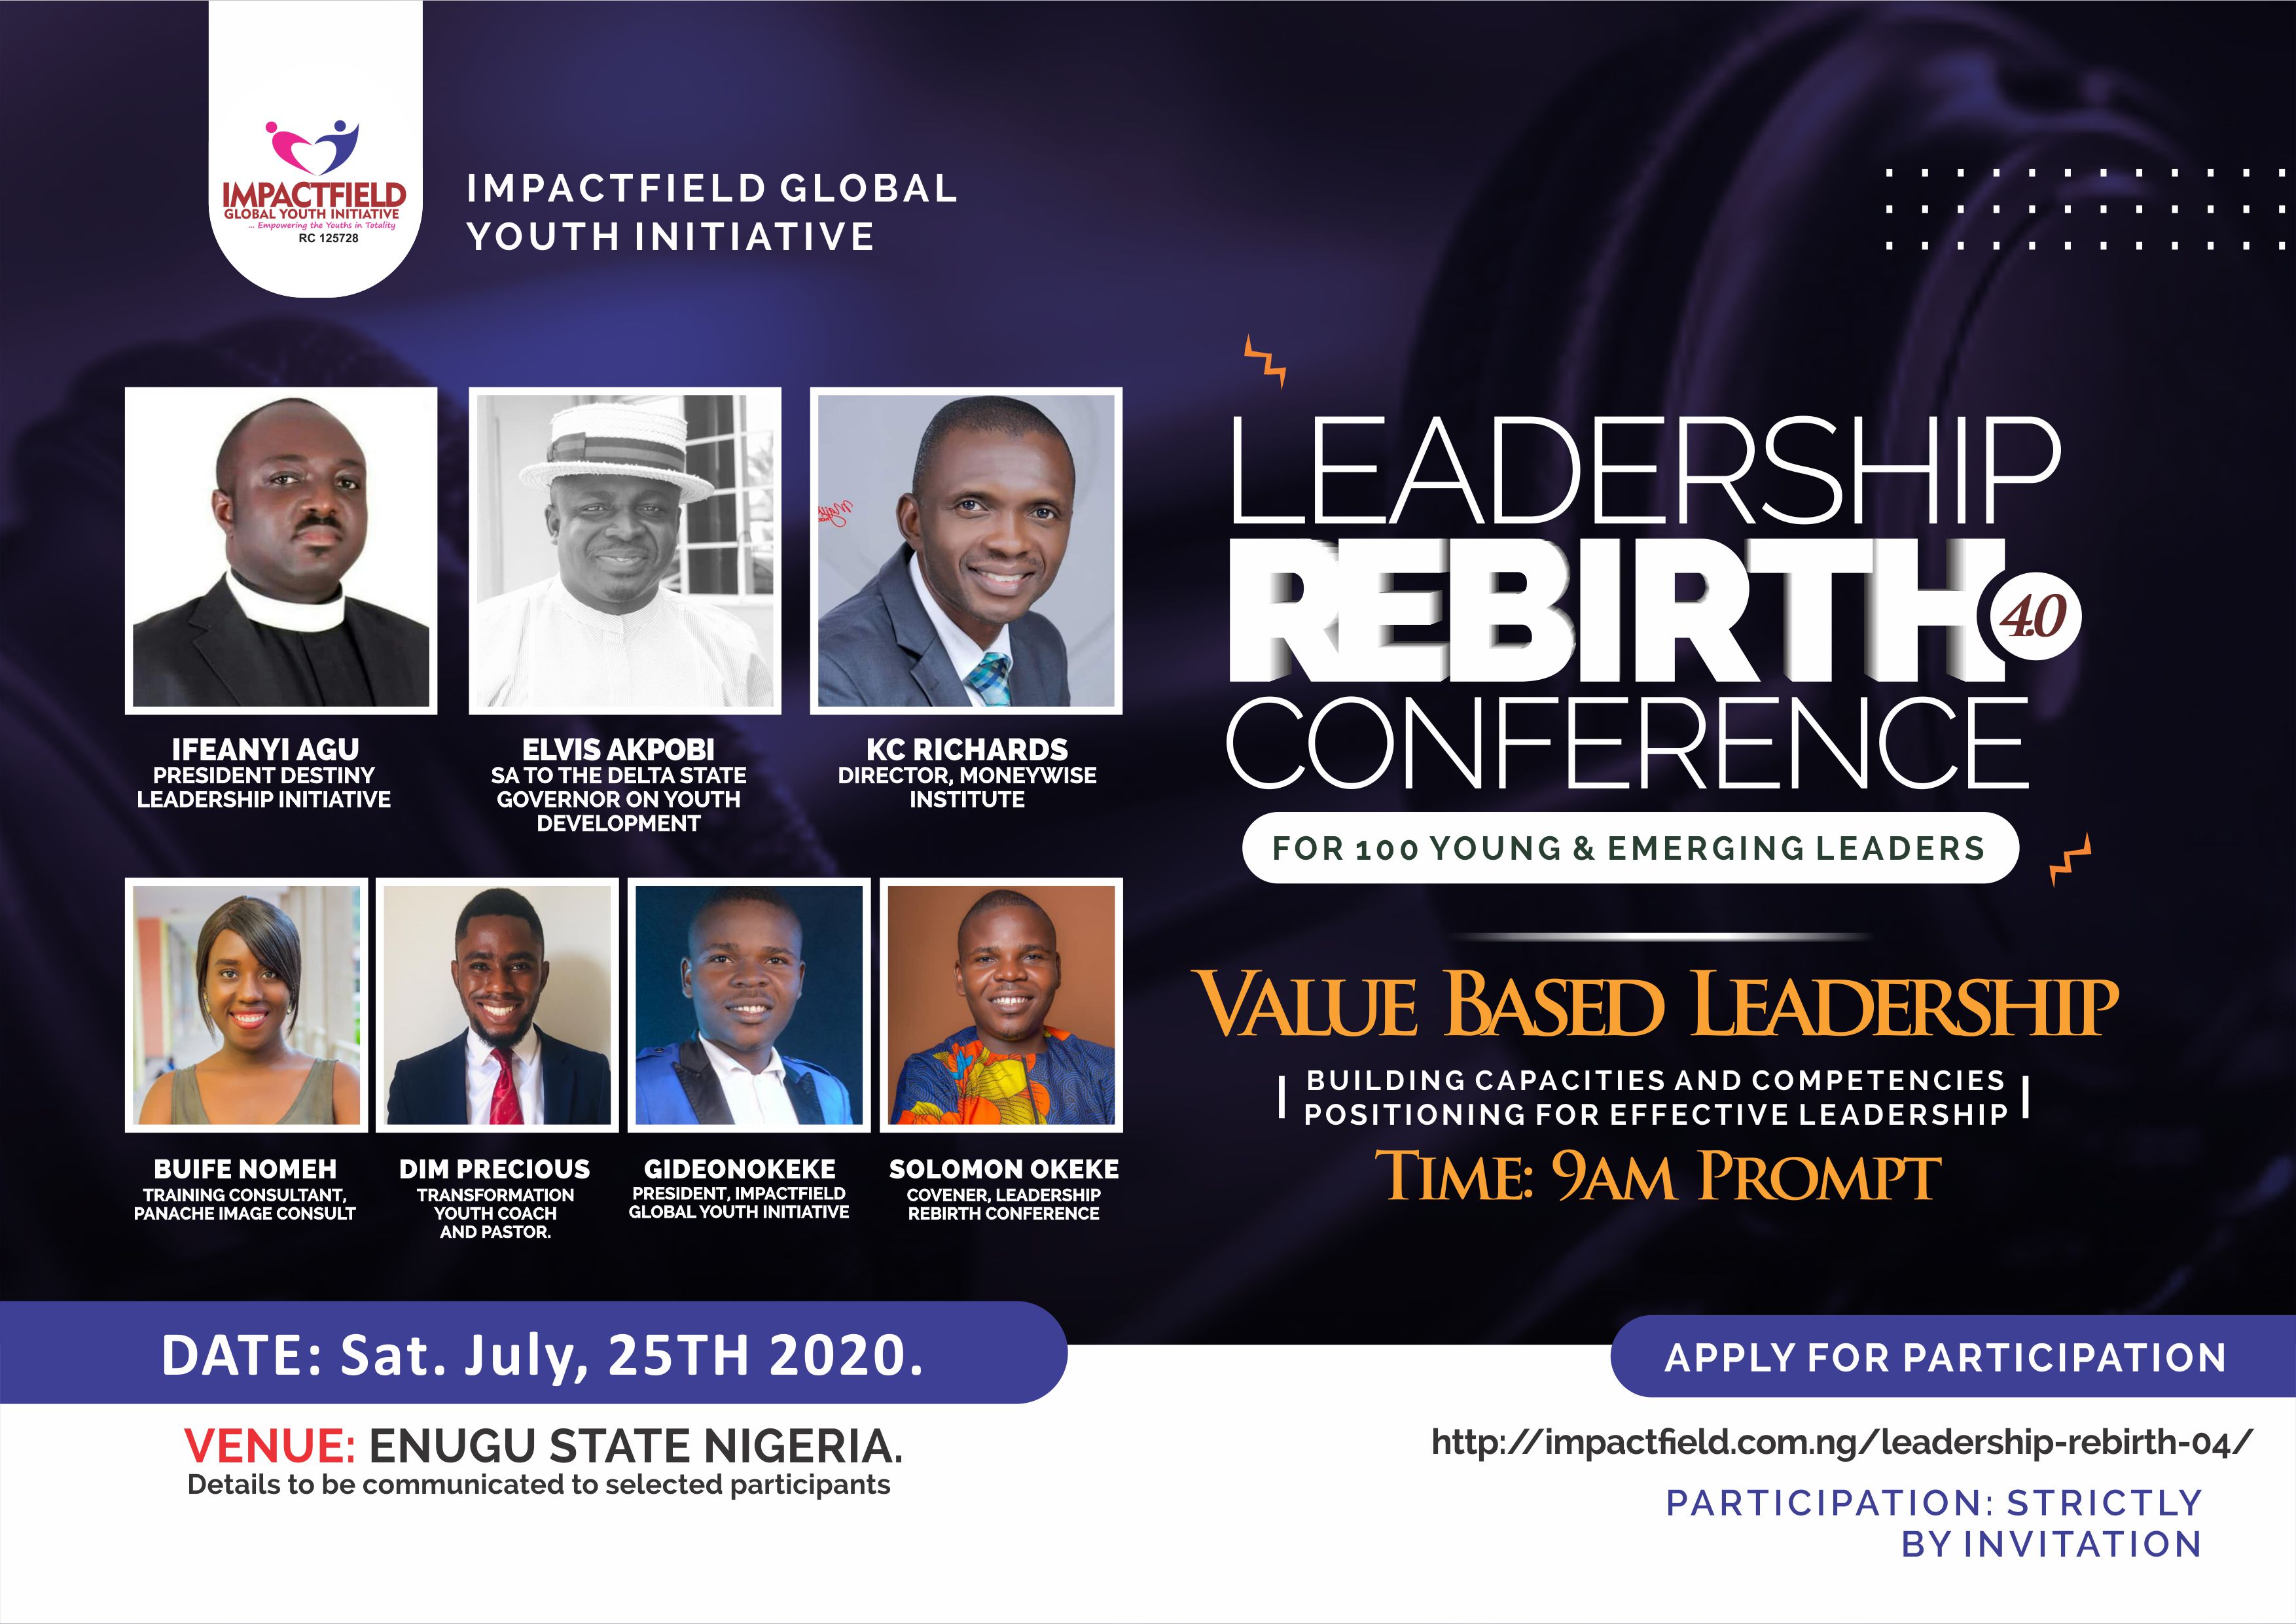 Leadership Rebirth Conference 4.0 - IMPACTFIELD GLOBAL YOUTH INITIATIVE